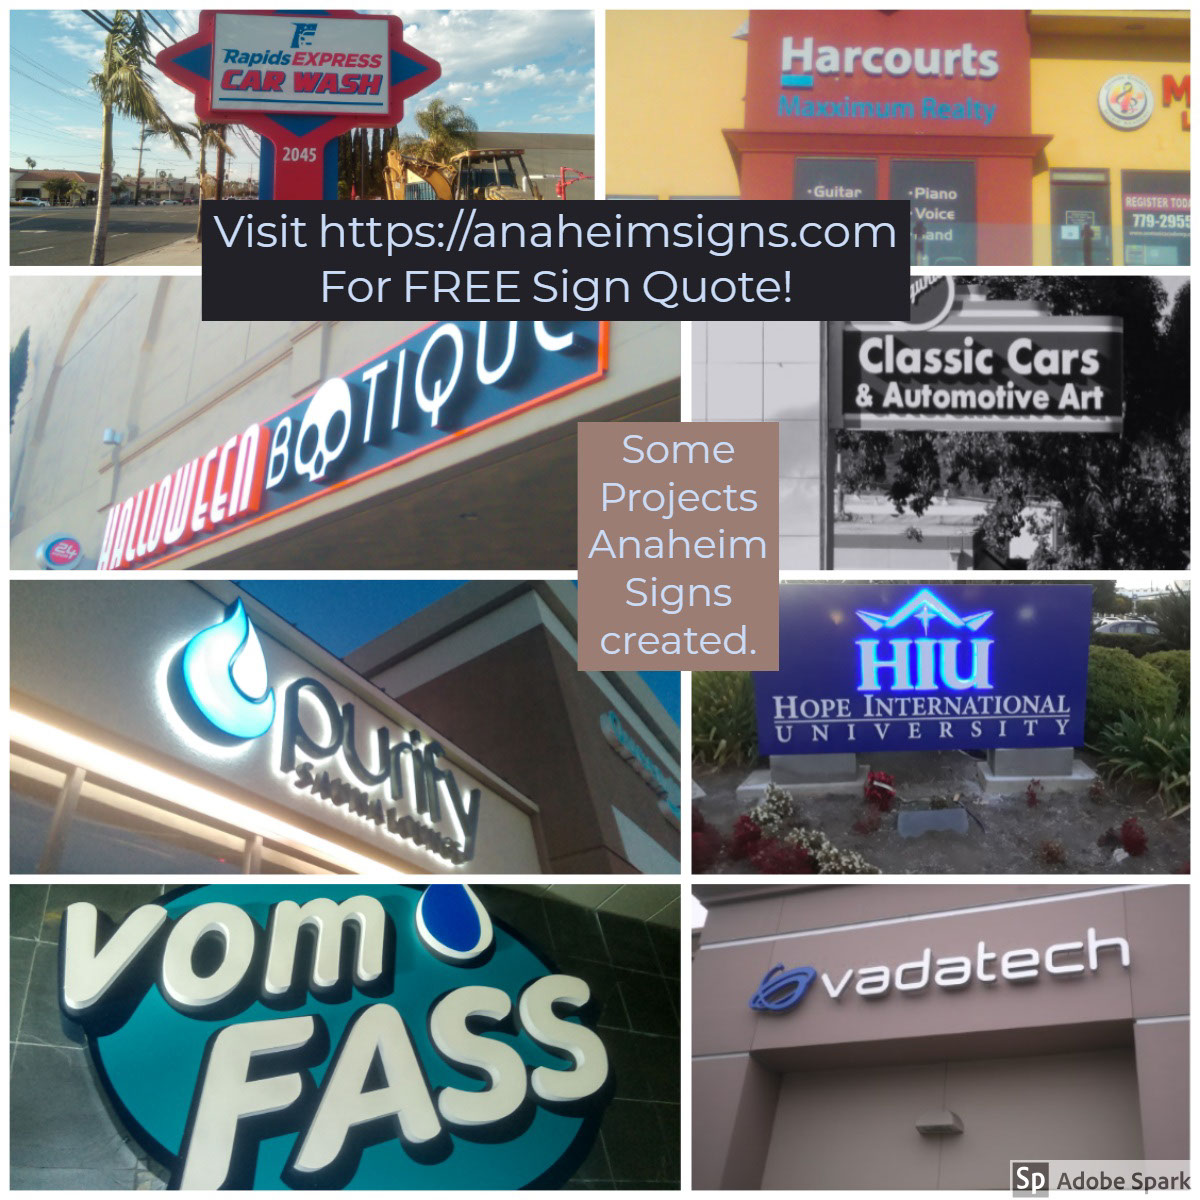 Visit https://anaheimsigns.com For FREE Sign Quote! Visit https://anaheimsigns.com For FREE Sign Quote!<P>Some Projects Anaheim Signs created. 